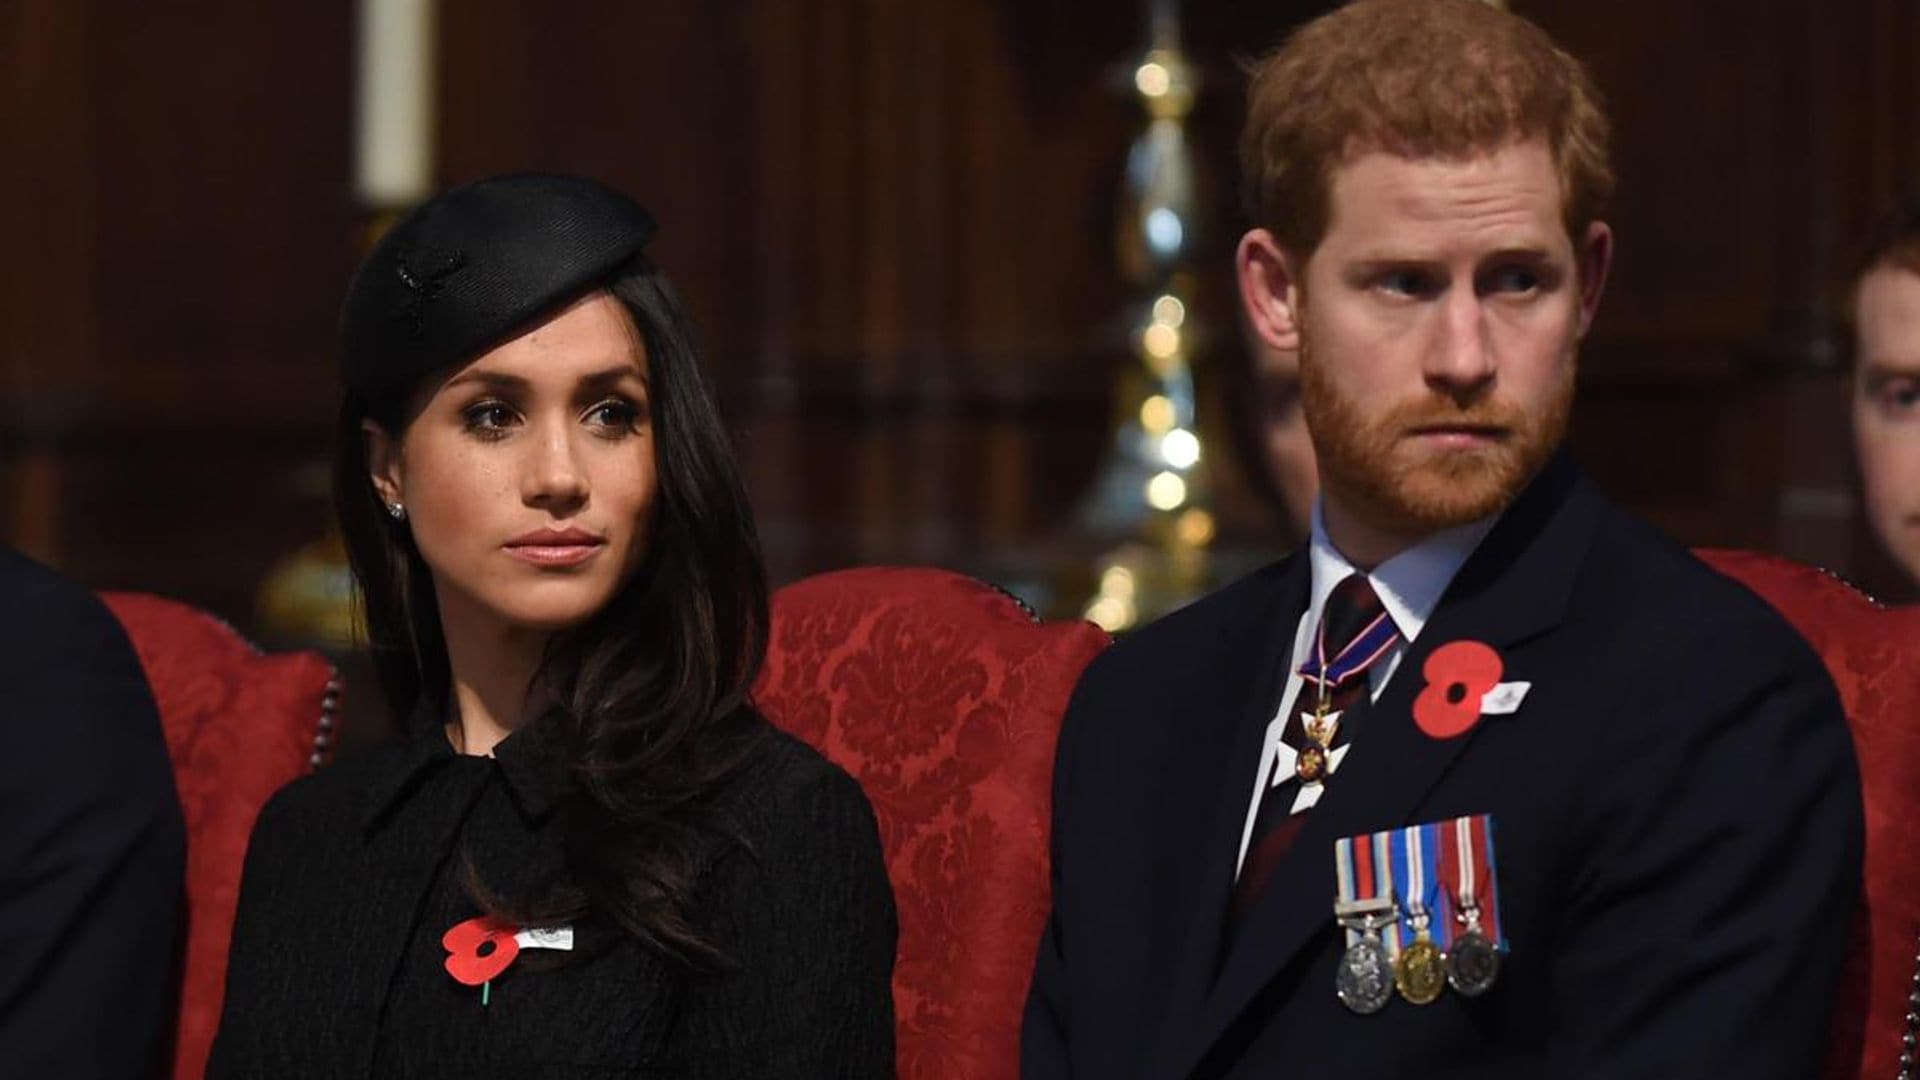 Meghan Markle and Prince Harry’s Archewell website pays tribute to Queen Elizabeth